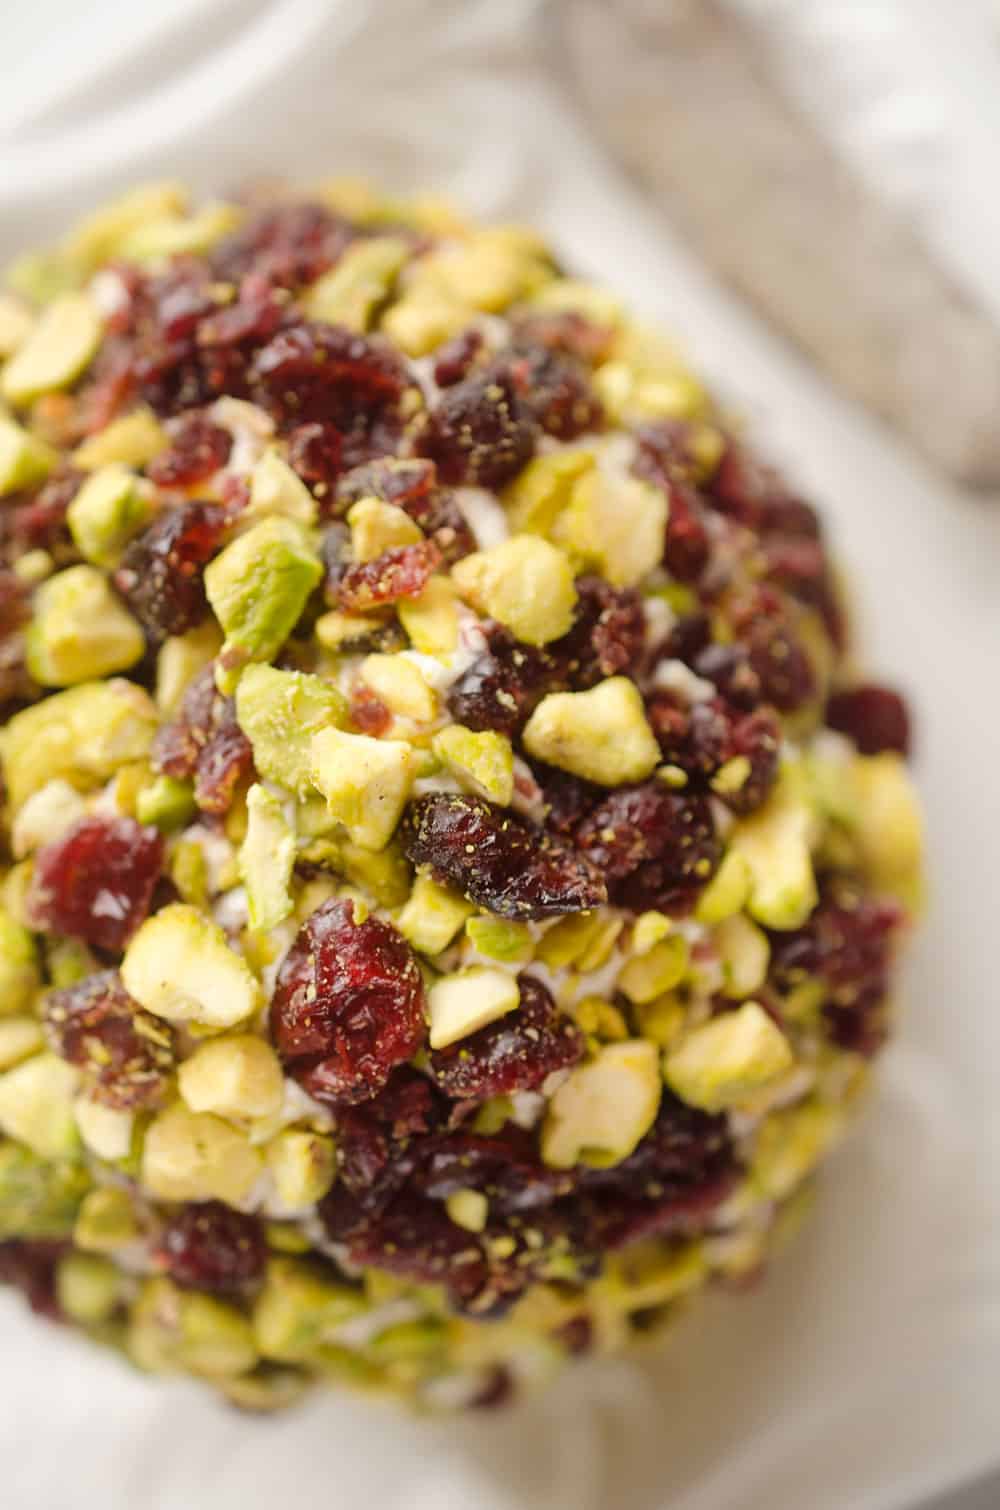 Cranberry Pistachio Cheese Ball is a festive red and green appetizer fantastic for the holidays! A cream cheese and cranberry mixture is rolled in salty pistachios and served with your favorite crackers for the perfect party food. 